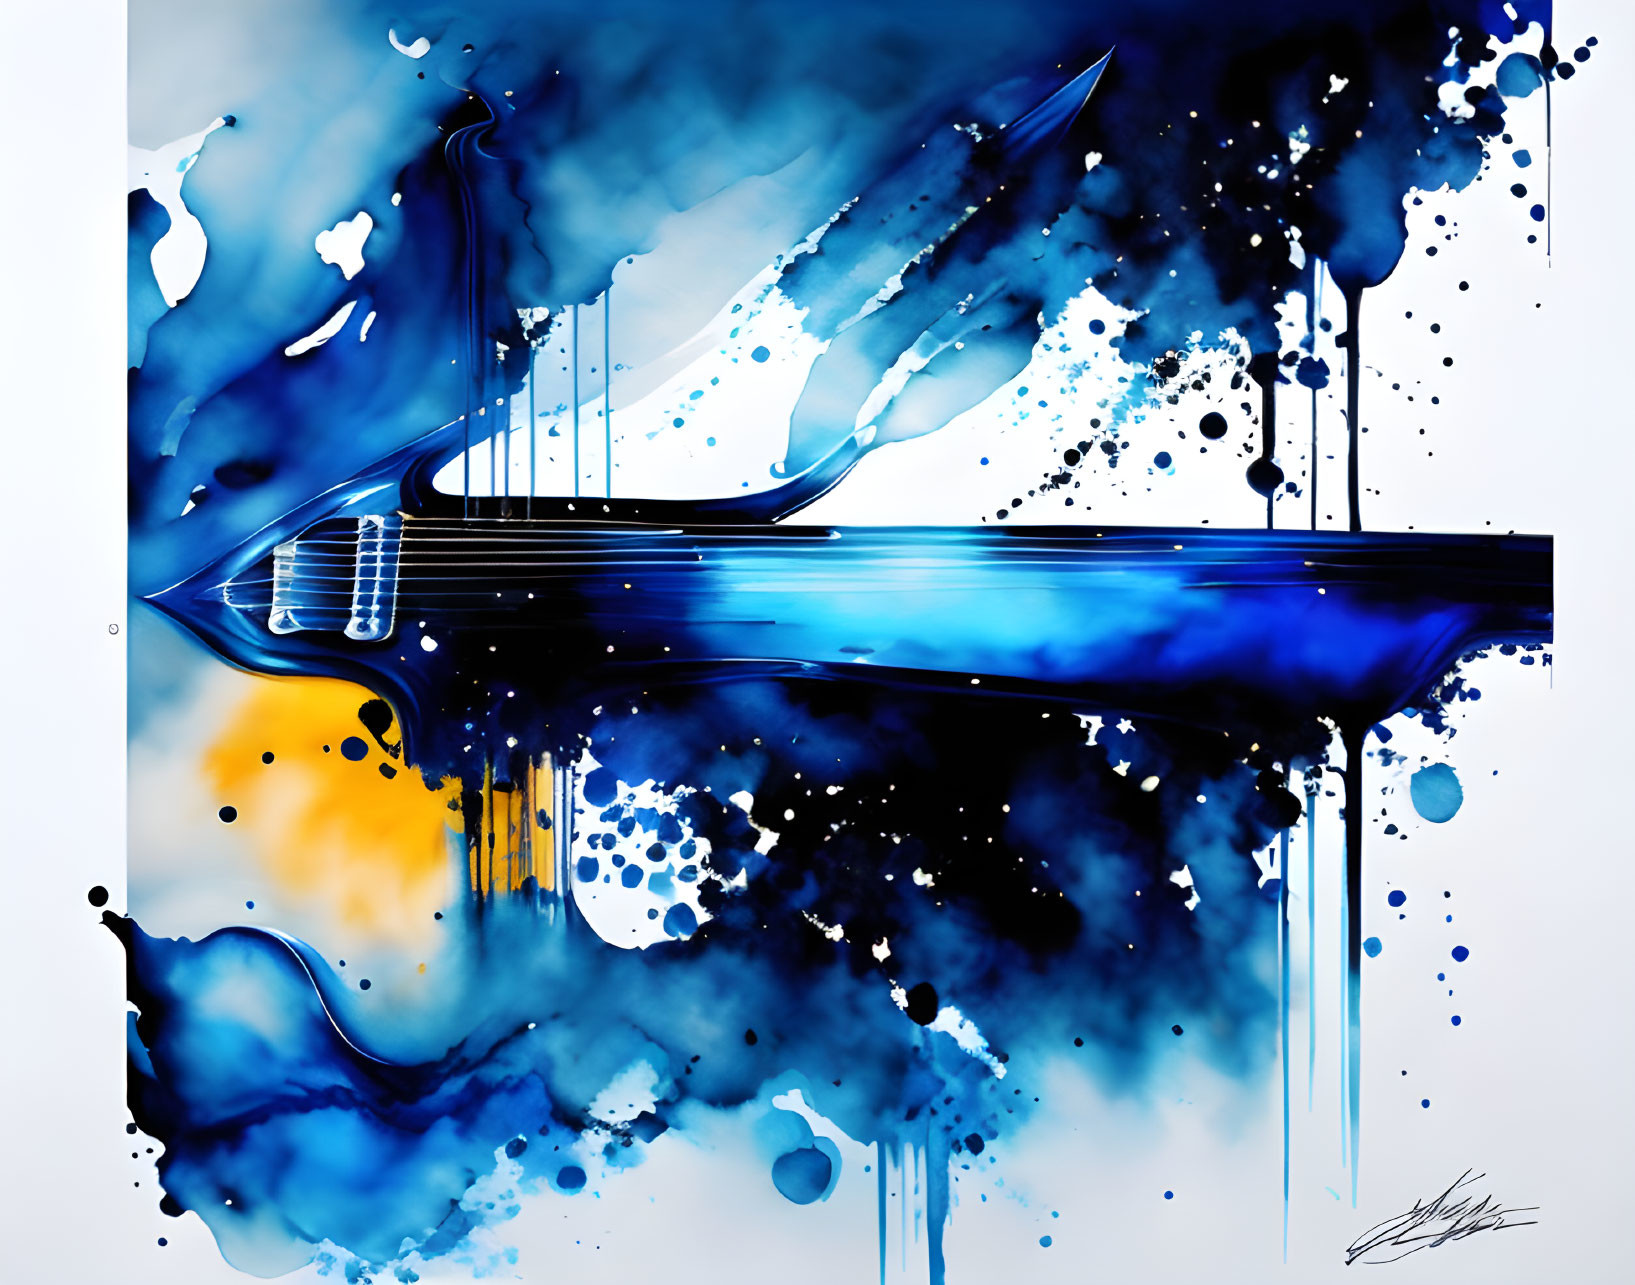 Abstract Guitar Artwork with Blue and Black Ink Splashes on White Background